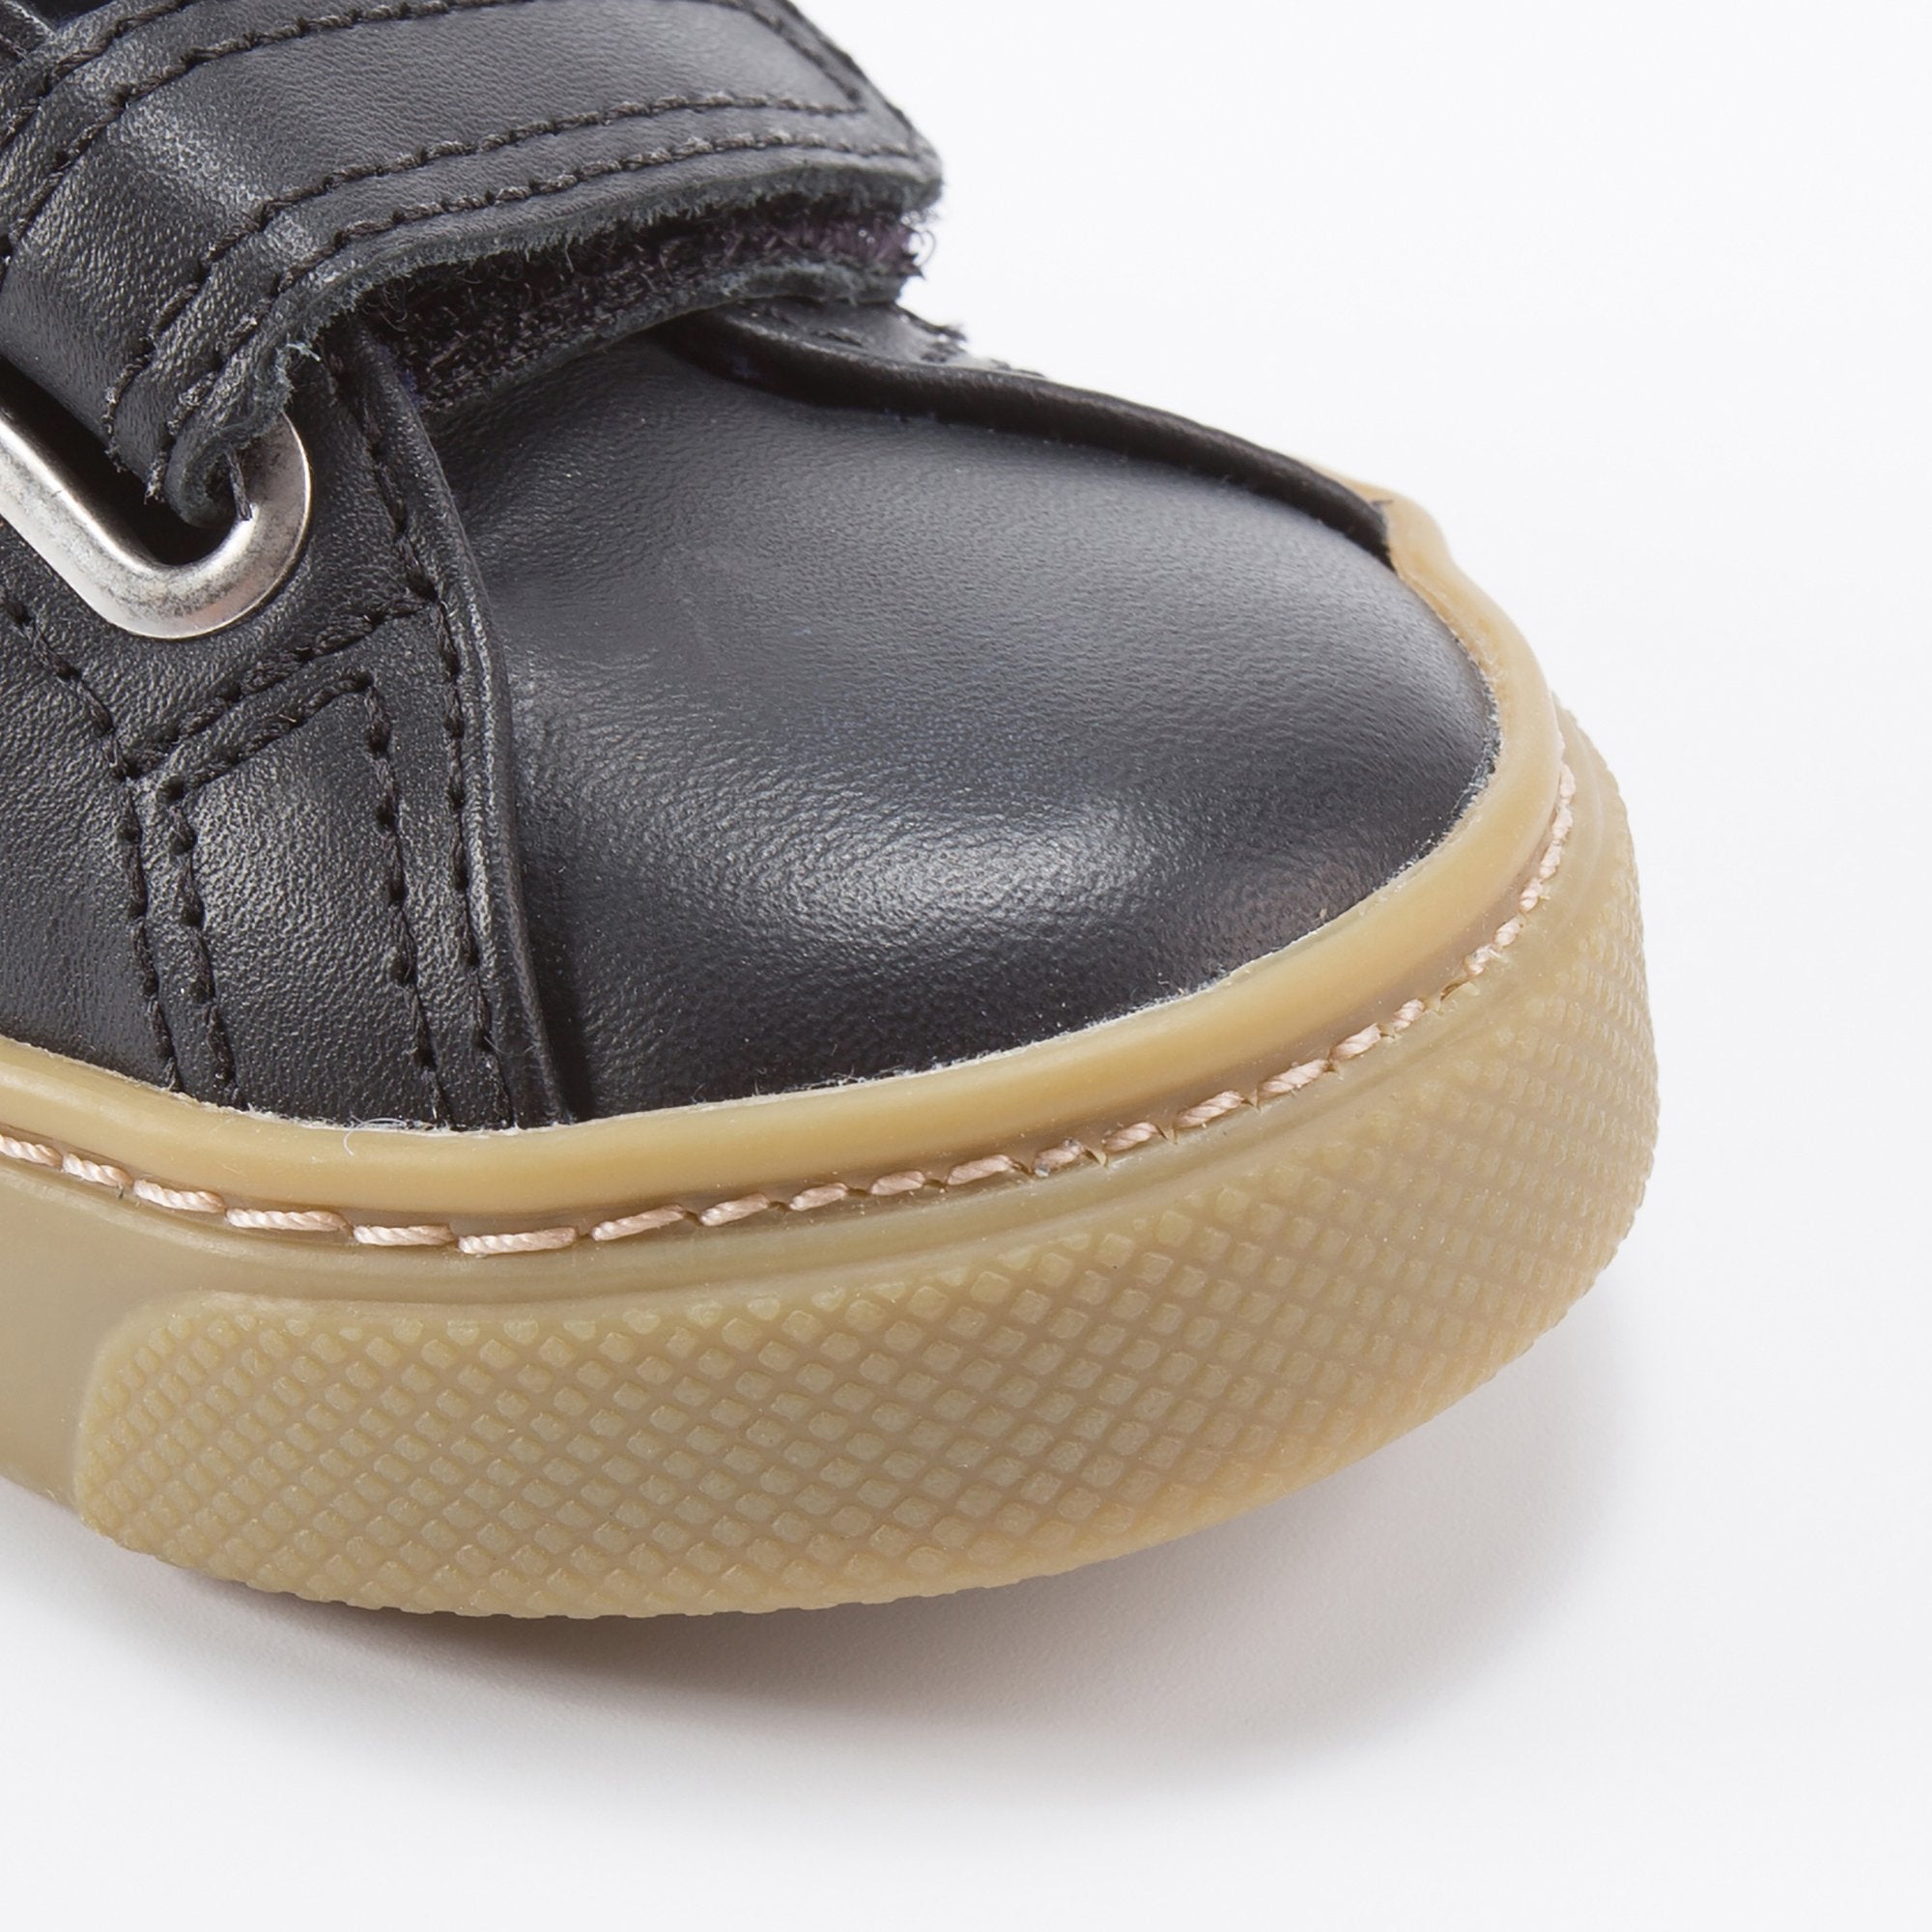 Boys Black Leather Velcro With White "V" Shoes